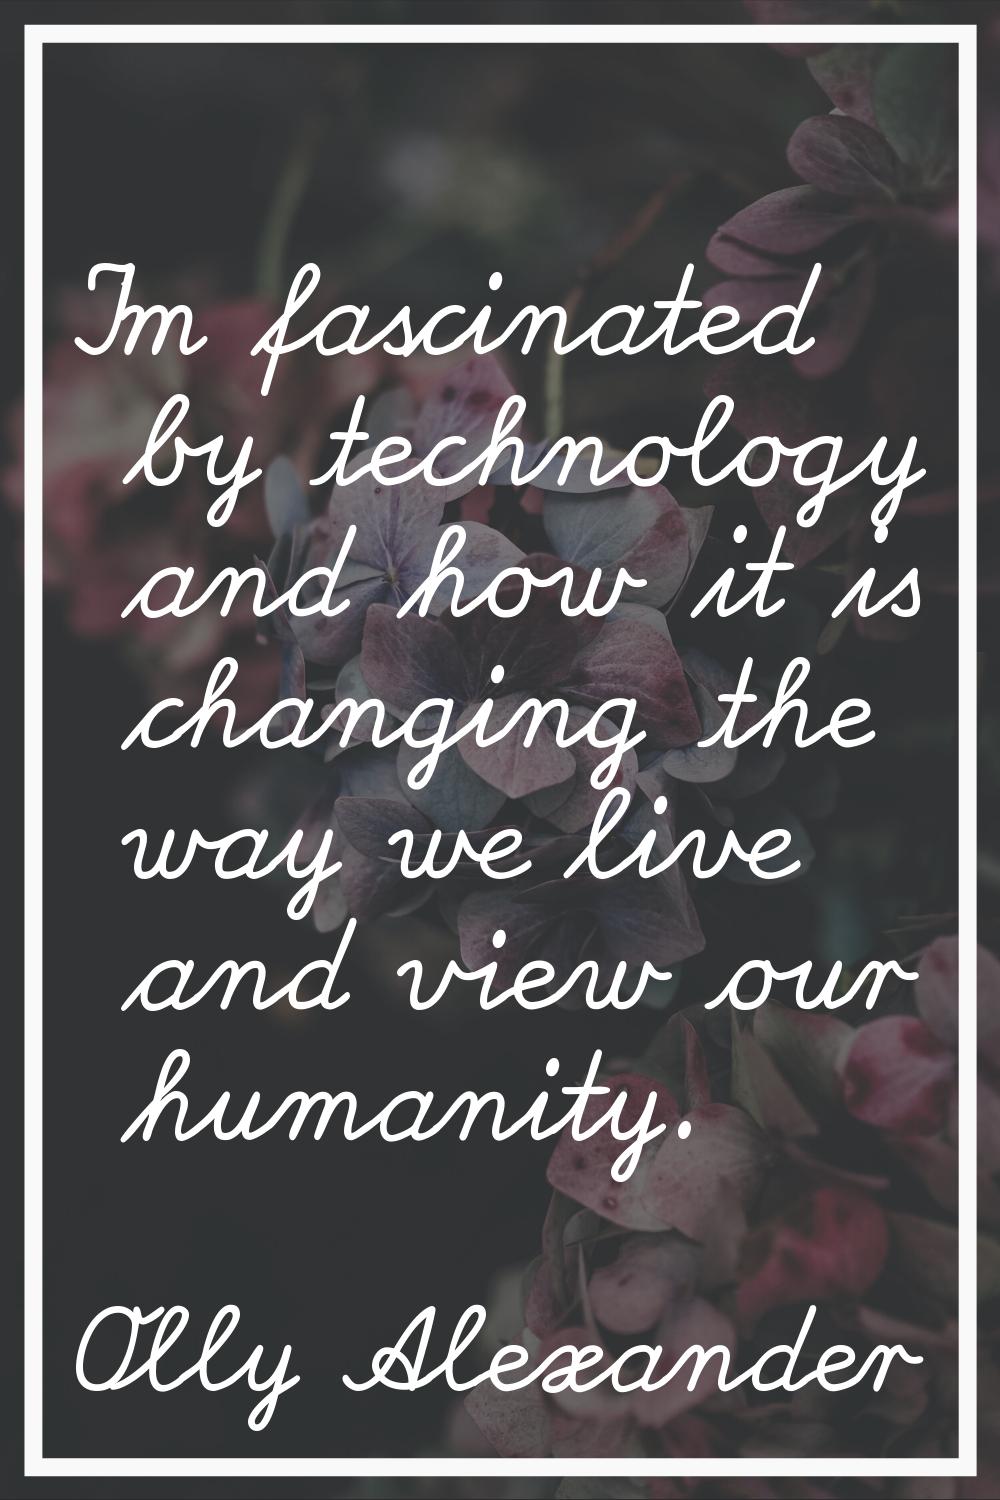 I'm fascinated by technology and how it is changing the way we live and view our humanity.